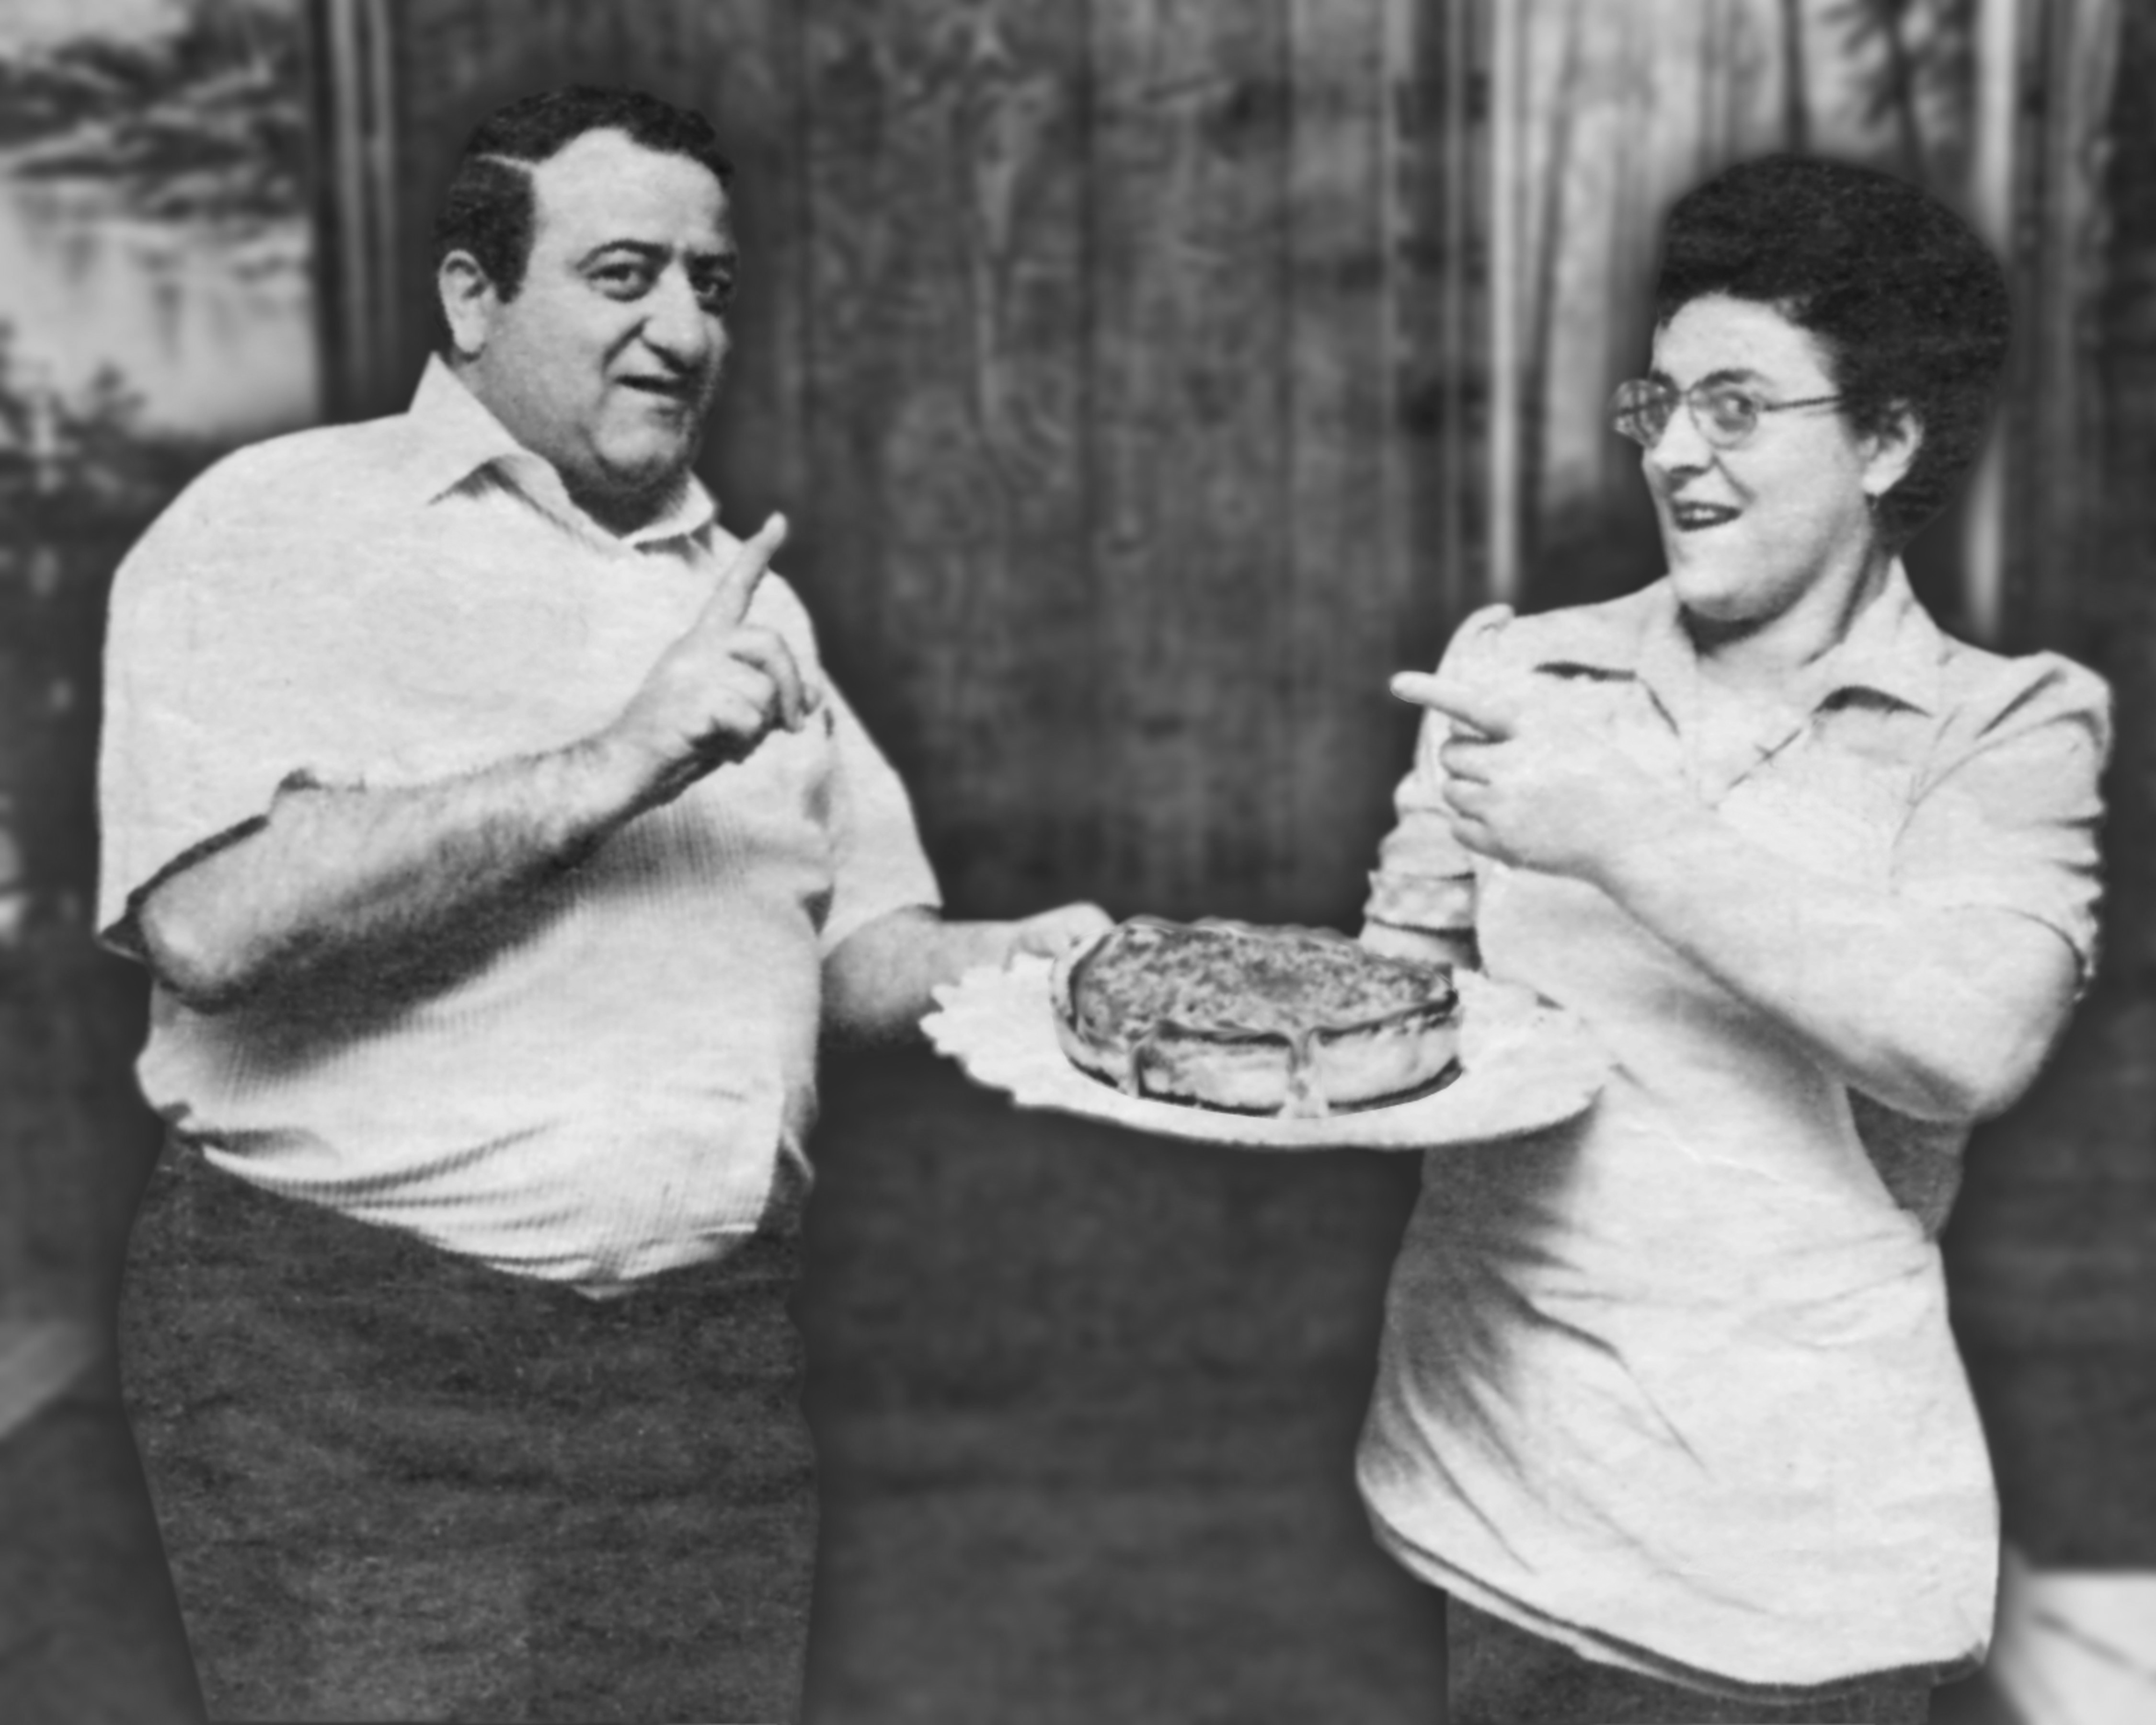 A man and a woman carry a plate containing a stuffed pizza and point at each other